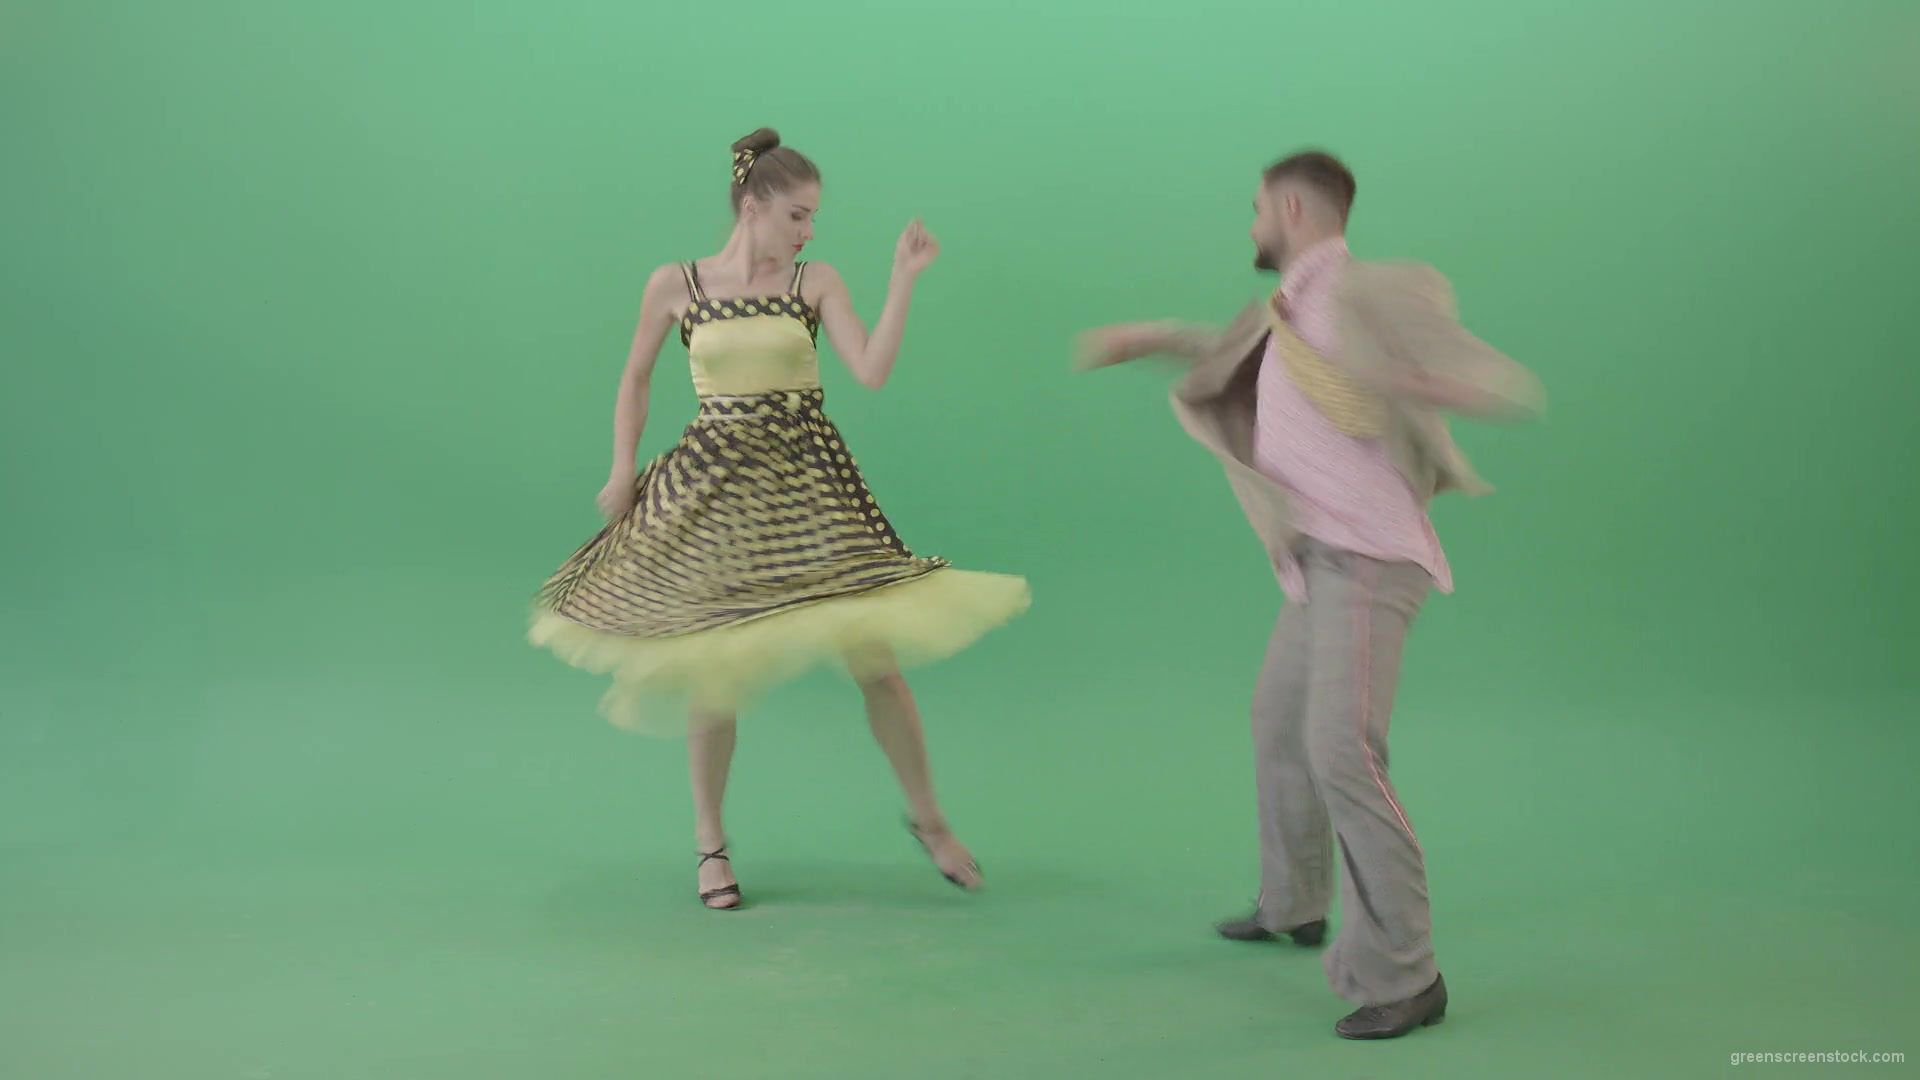 Boy-and-Girl-dancing-Boogie-woogie-and-rockandroll-isolated-on-Green-Screen-4K-Video-Footage-1920_008 Green Screen Stock